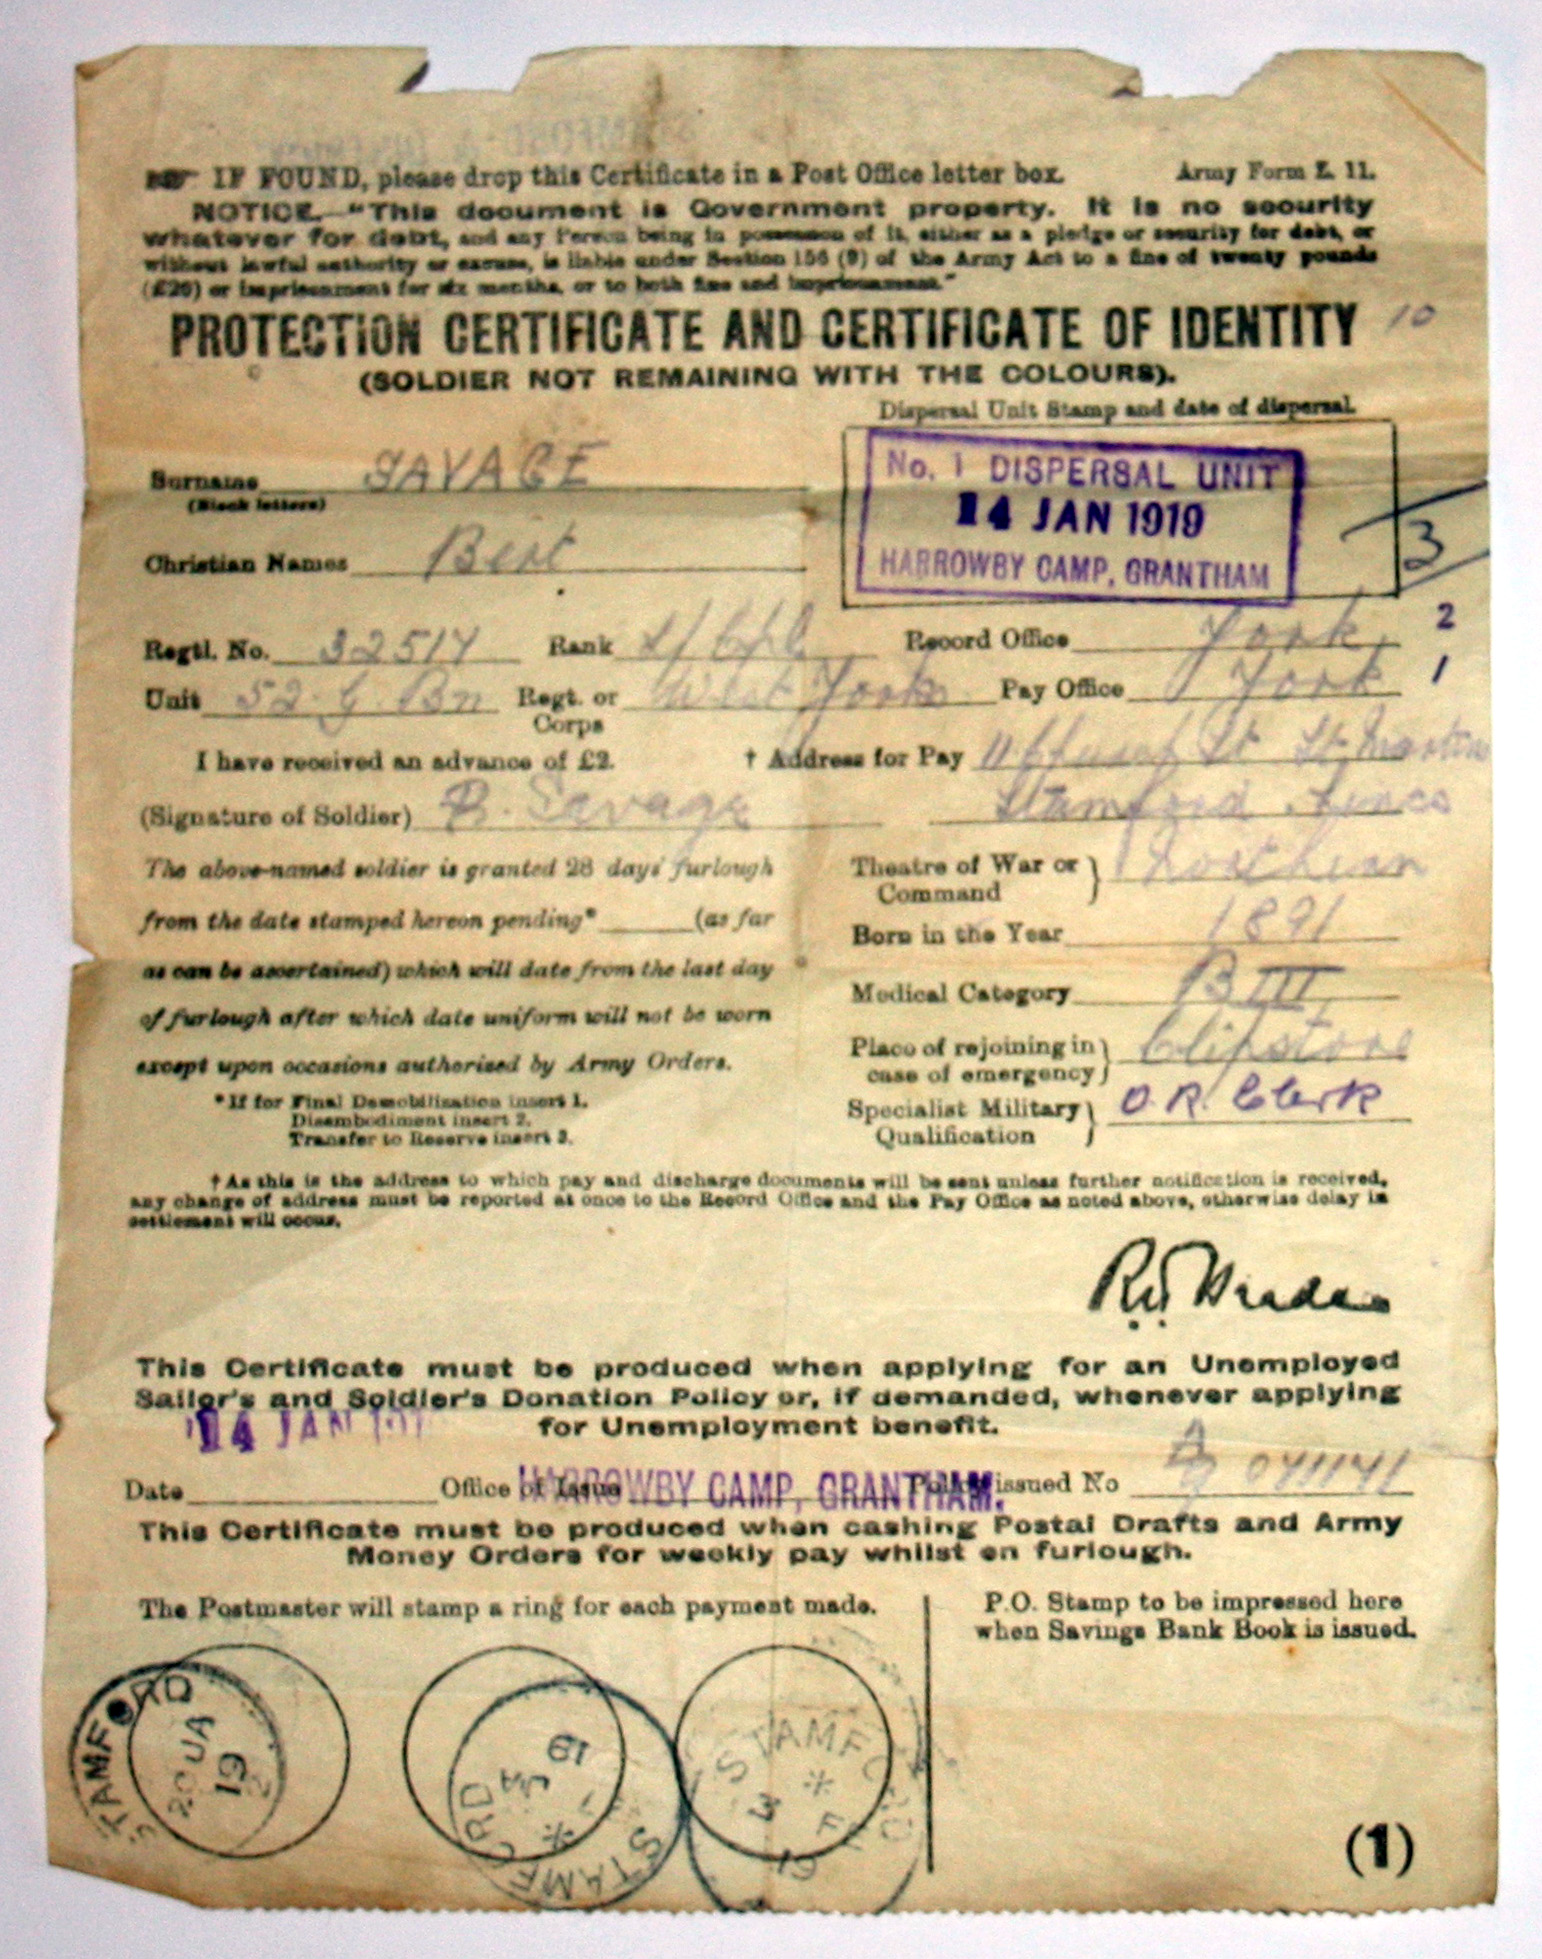 bert savage - id and protection certificate on leave.jpg